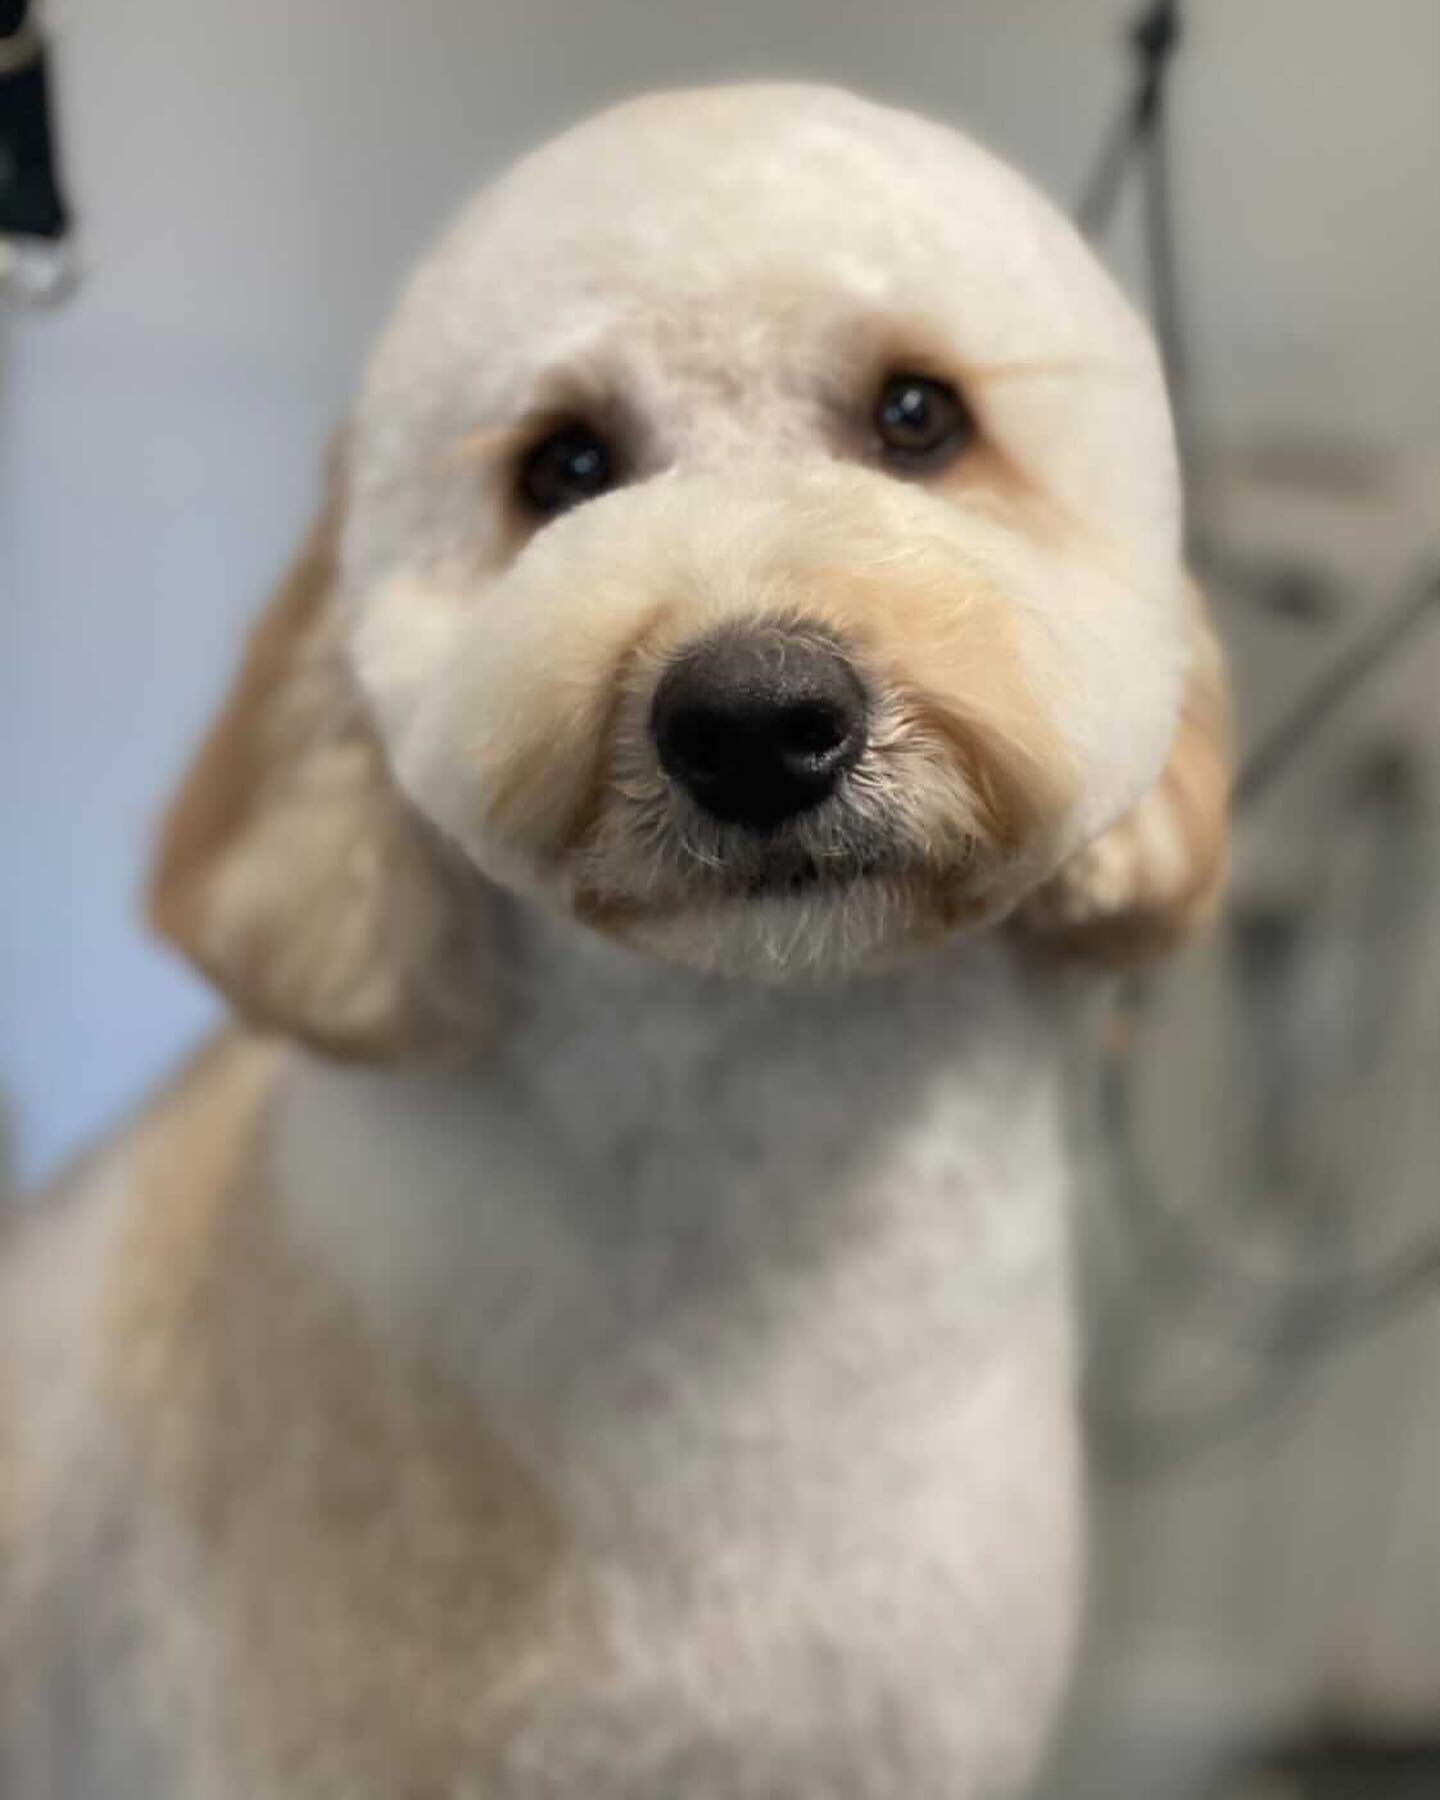 How stunning is our client Mr Xiao Xiao, Labradoodle 😍 He sure does like to lick his lips and pose for the camera, but when you snap that pic he looks 👌🏽A perfect cut and groom for Mr Xiao Xiao! Ps. Not to mention his incredibly lushes eyelashes ?